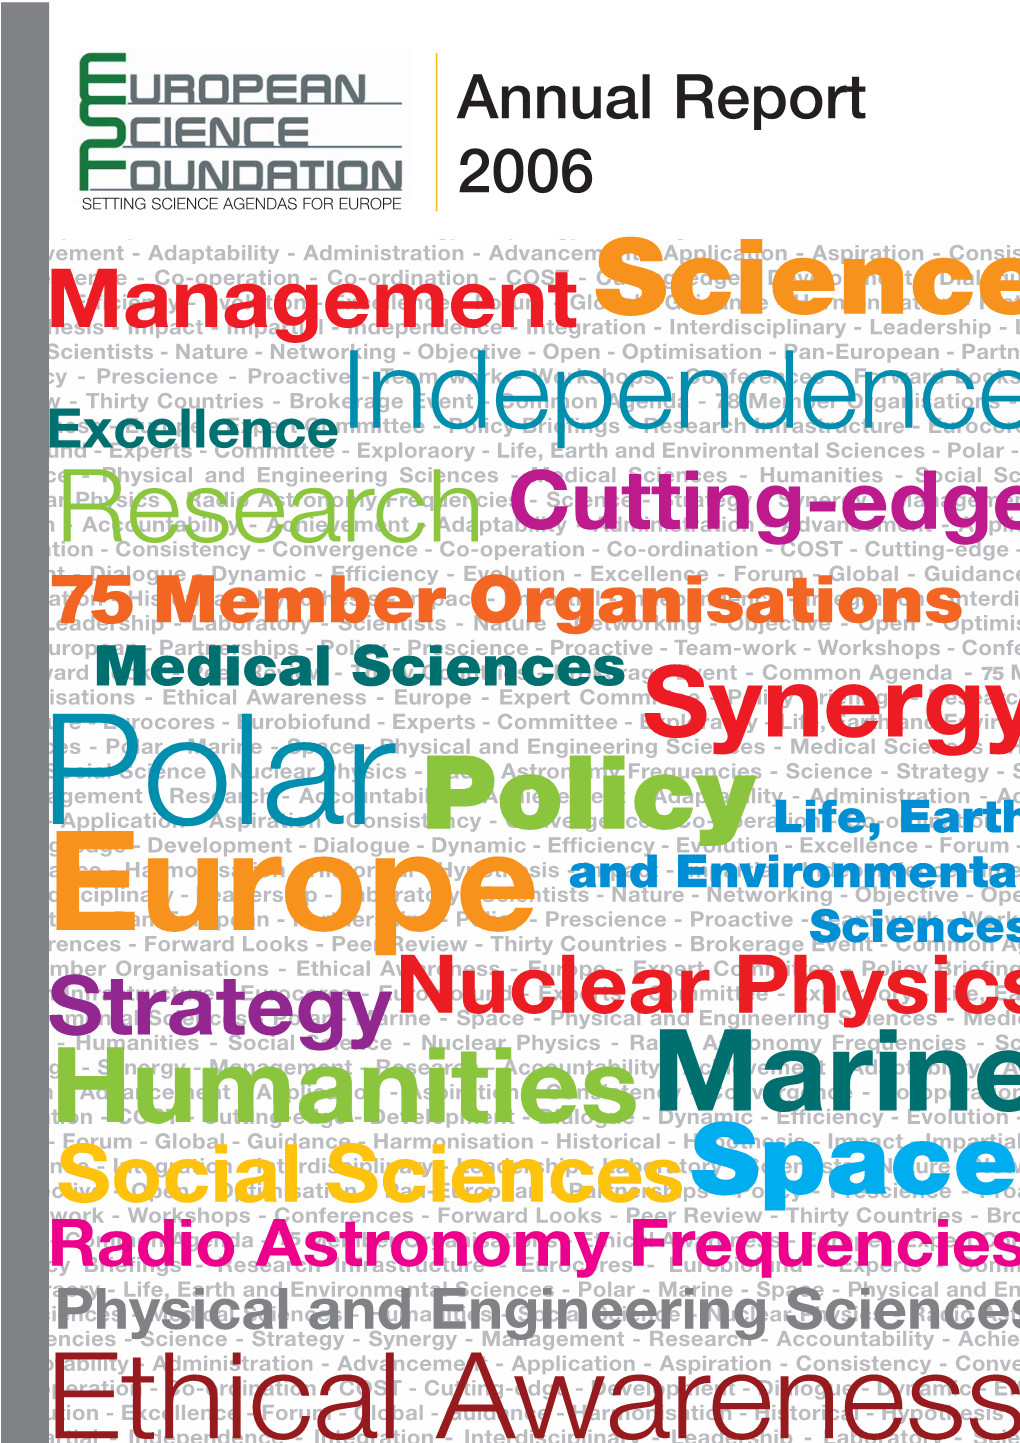 Annual Report 2006 SETTING SCIENCE AGENDAS for EUROPE